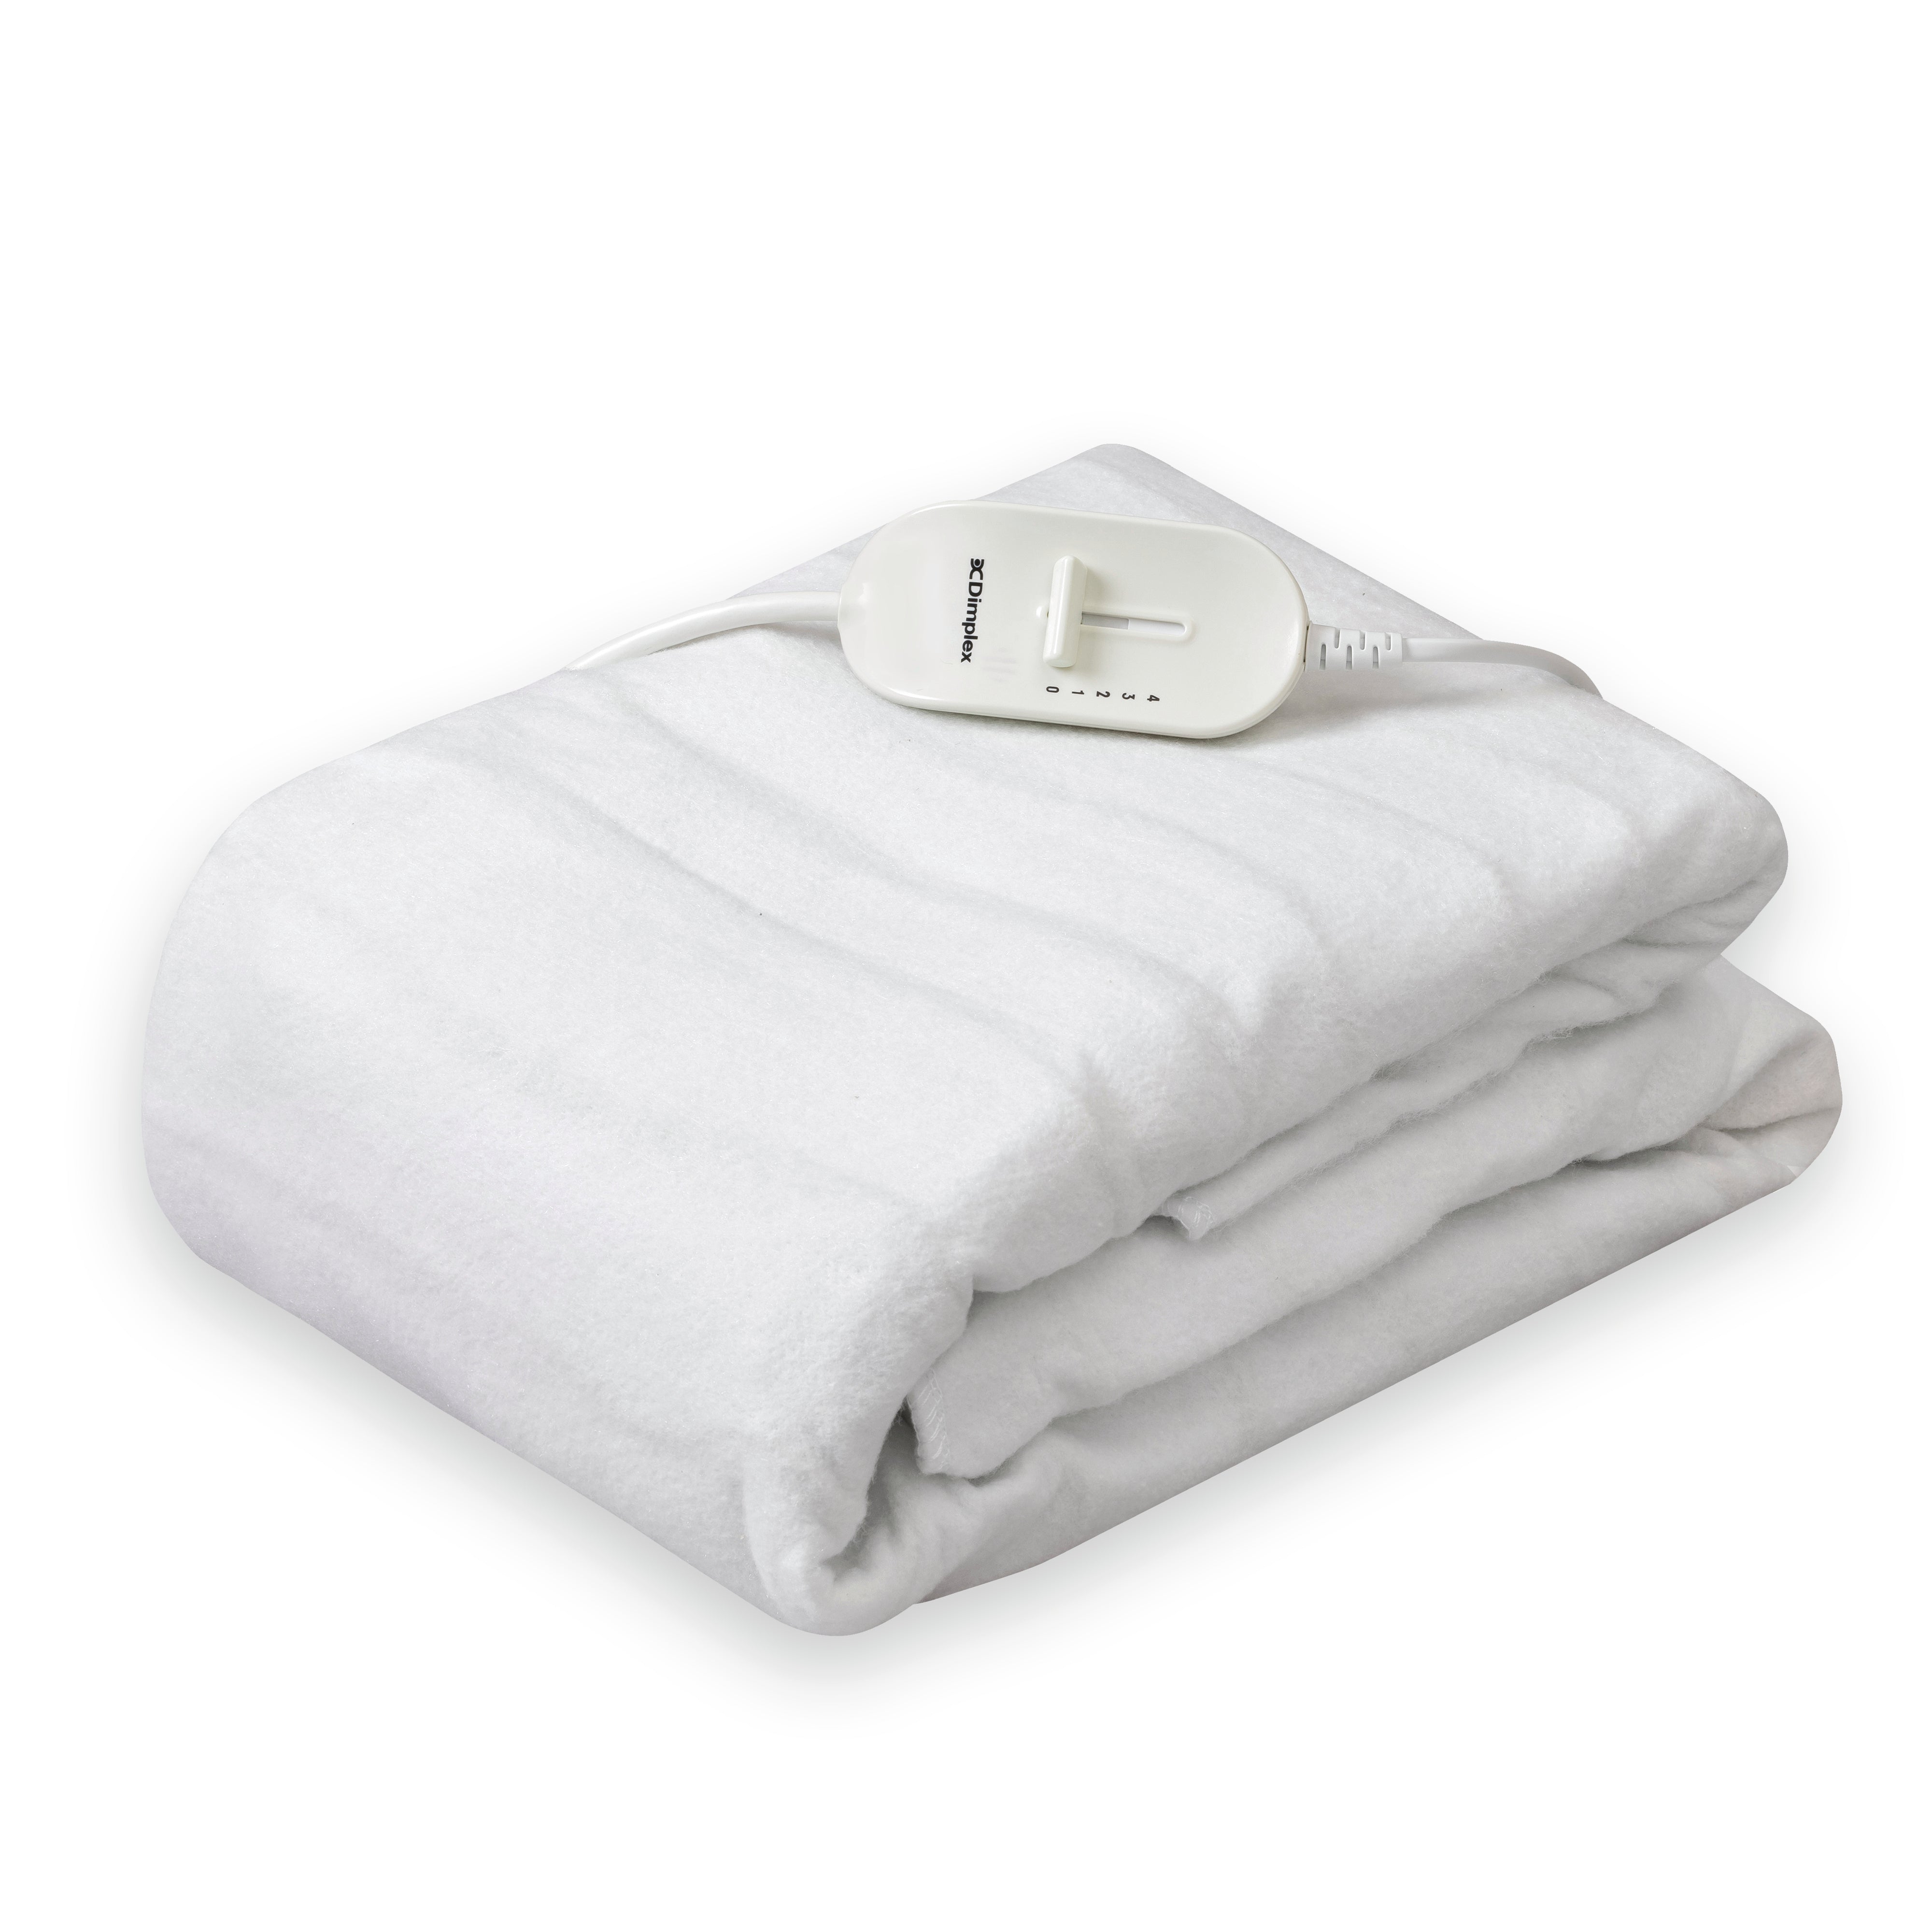 Dimplex Double Washable Heated Underblanket l DUB1002